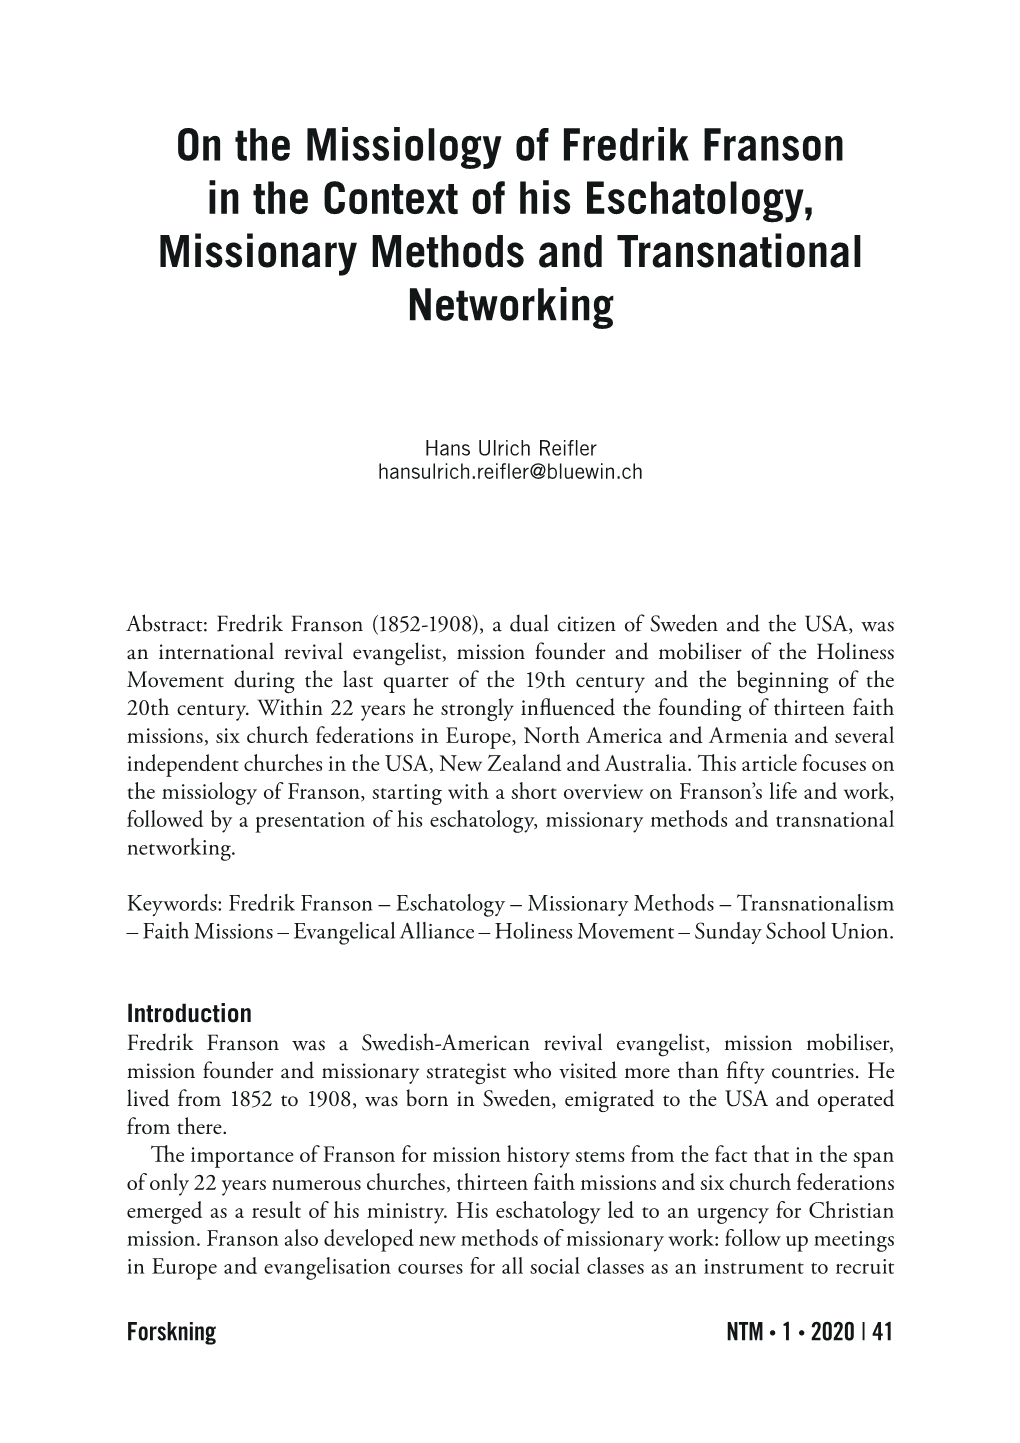 On the Missiology of Fredrik Franson in the Context of His Eschatology, Missionary Methods and Transnational Networking